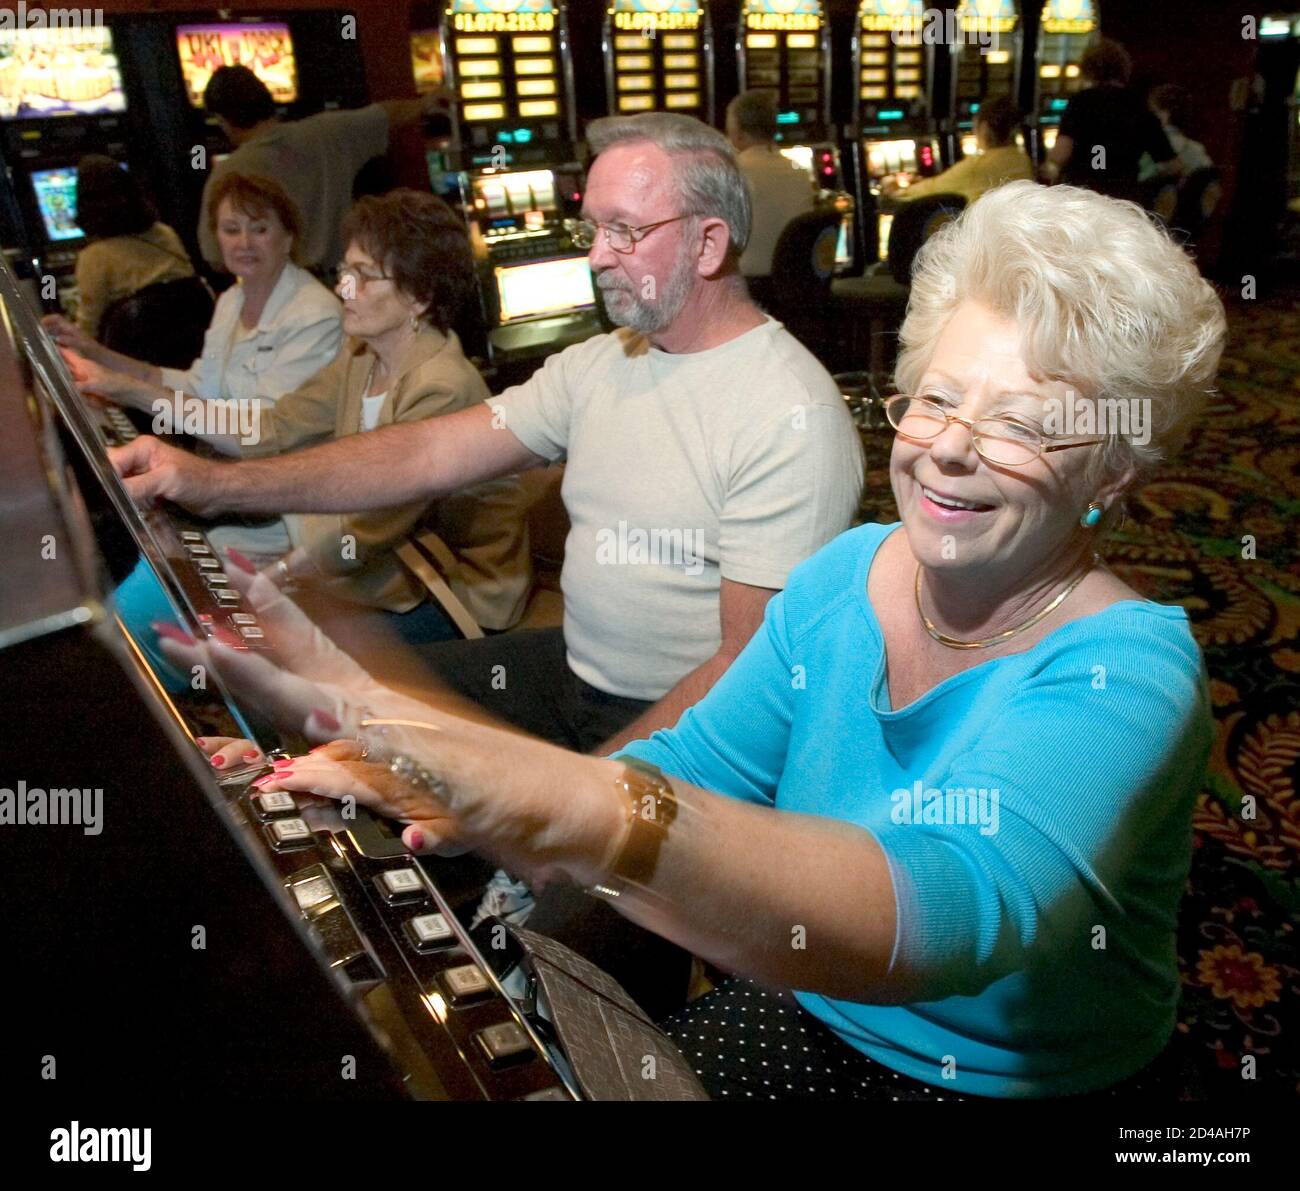 Deborah Phillips and her husband Charlie Phillips of Vero Beach, Florida, play video poker at Binion's Horseshoe Hotel & Casino after it reopened under the operation of Harrah's Entertainment, Inc. in Las Vegas, Nevada, April 1, 2004. The landmark casino had been closed since federal marshals and Nevada gaming regulators closed it down in January. The Phillips' said they came to Las Vegas specifically for the hotel's reopening. REUTERS/Las Vegas Sun/Ethan Miller  EM/HB Stock Photo